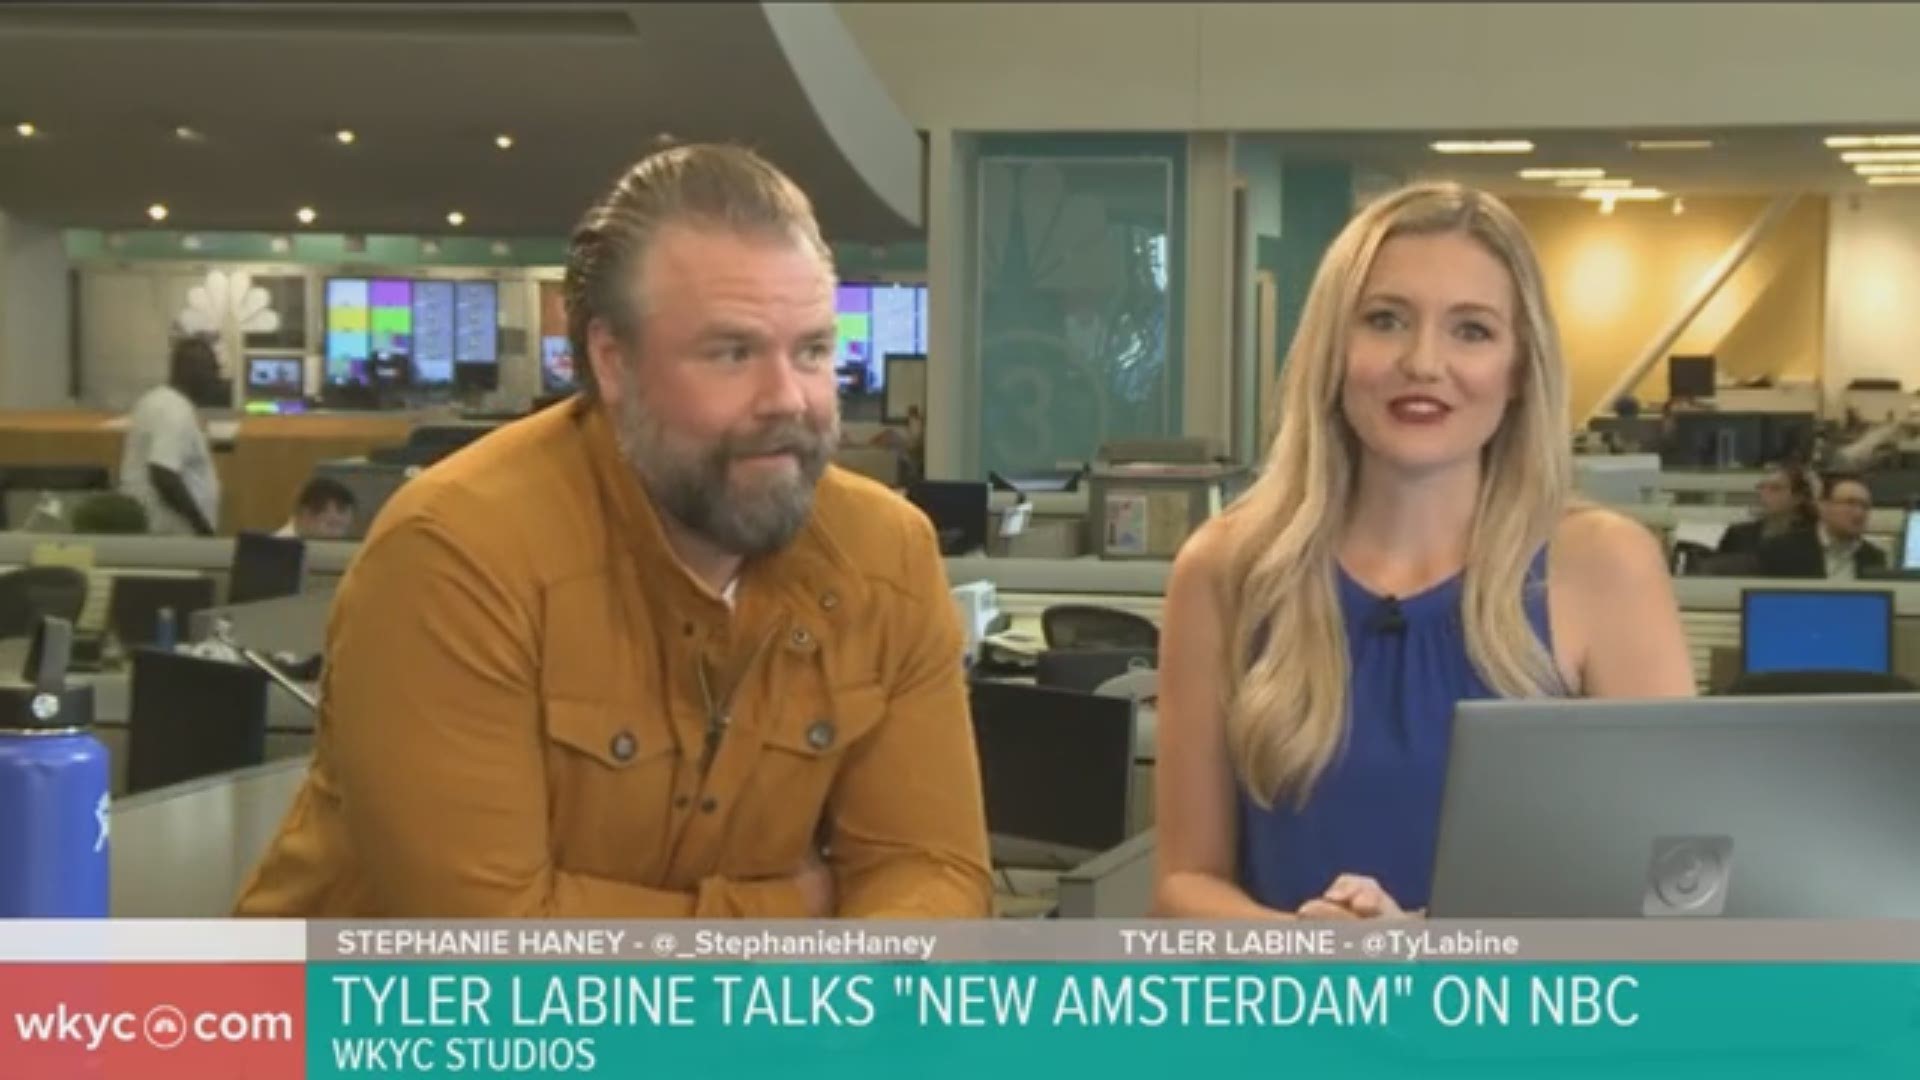 Labine, who plays Dr. Iggy Frome in the NBC drama "New Amsterdam," shared something special he's working on all season long just for fans. Watch Tuesdays at 10 p.m.